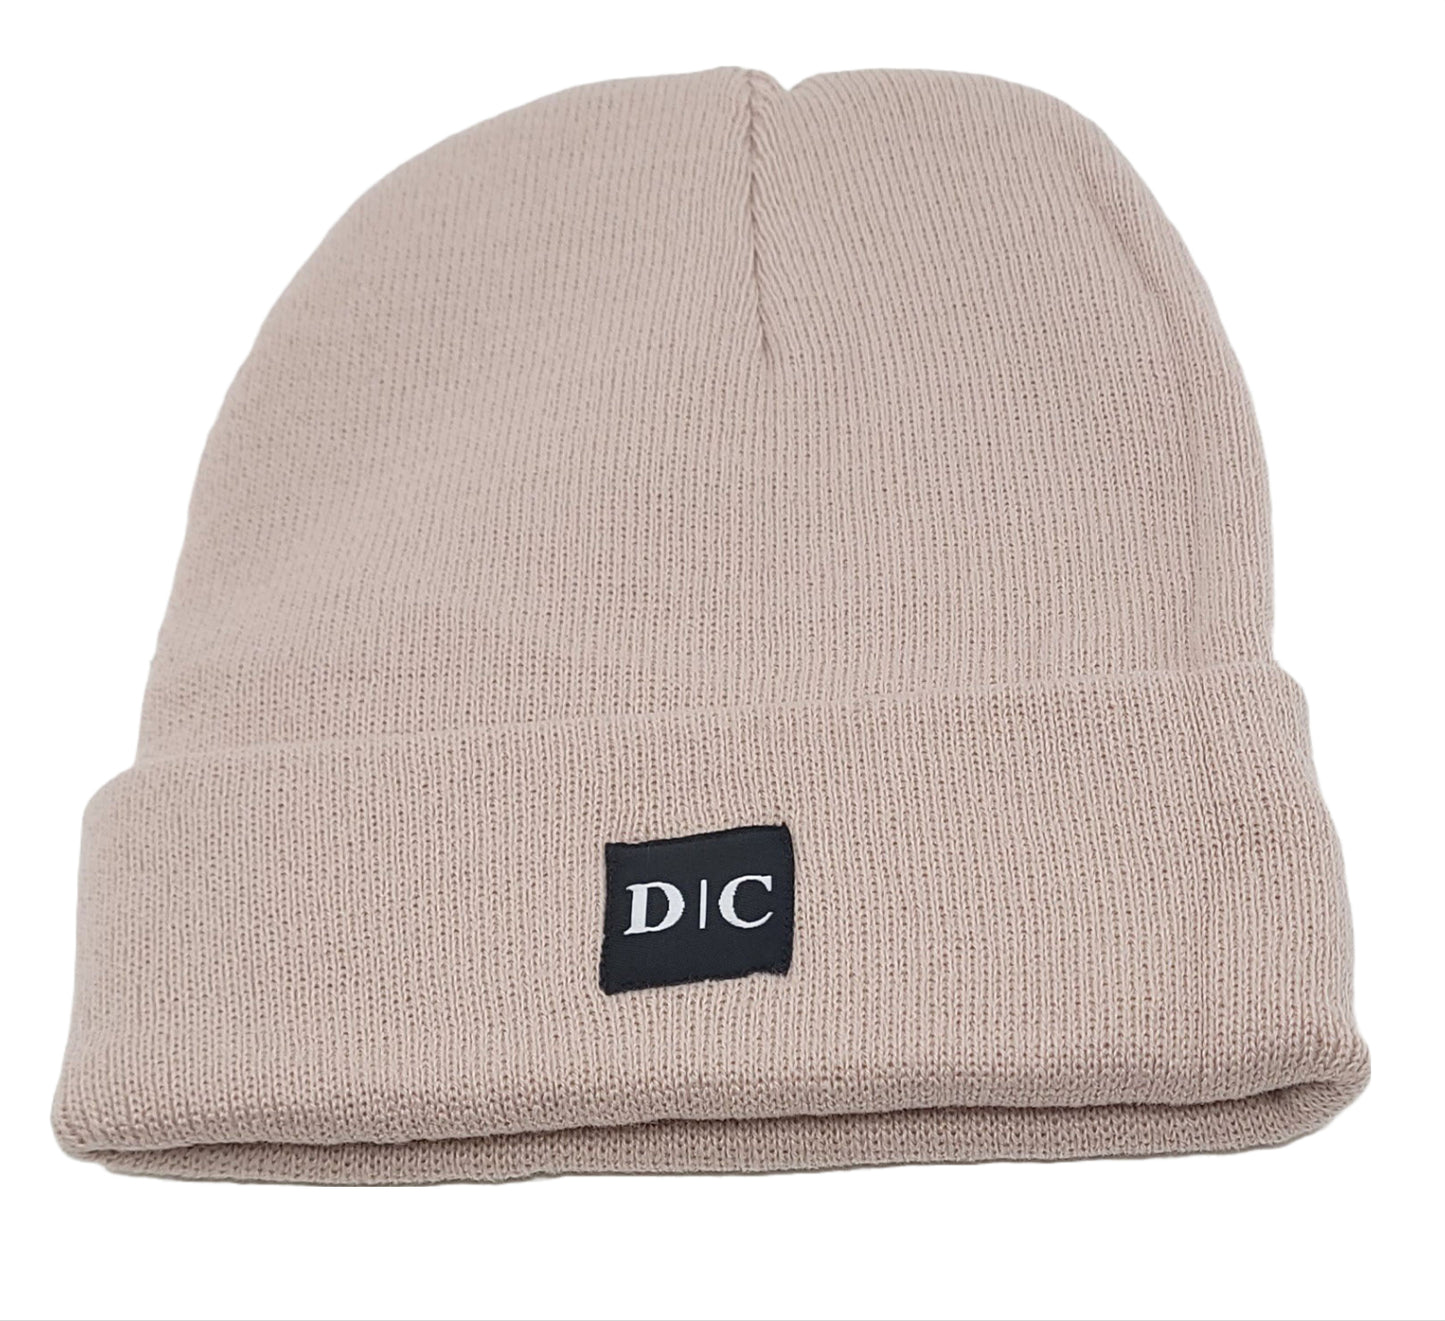 Duro Clothing Beanie Hats for Men and Women Knit Cuffed and Black DC Patch